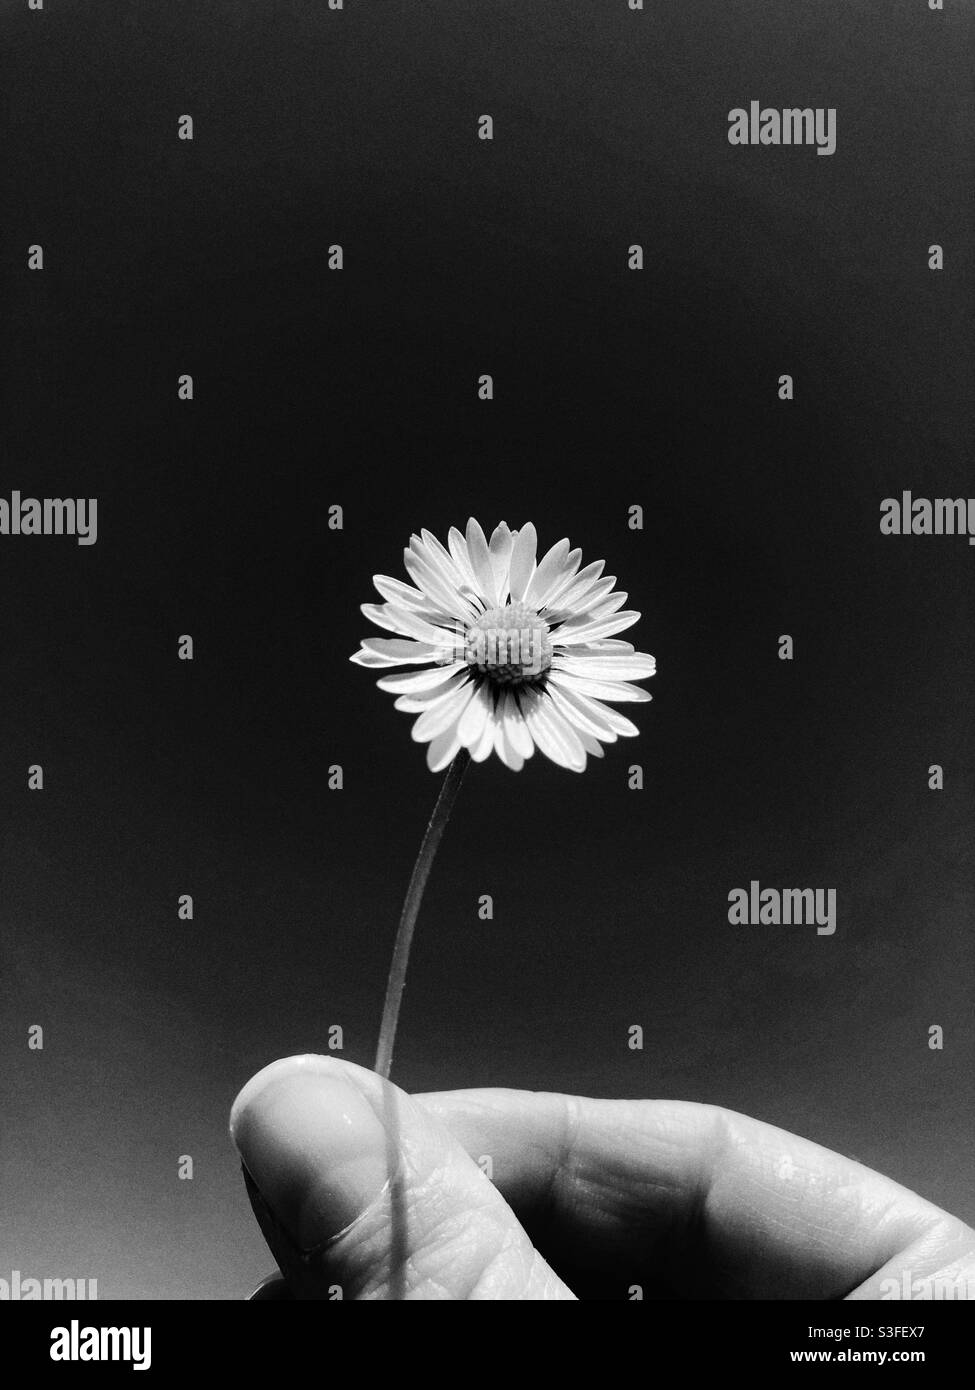 Black and white daisy being held up in a hand Stock Photo